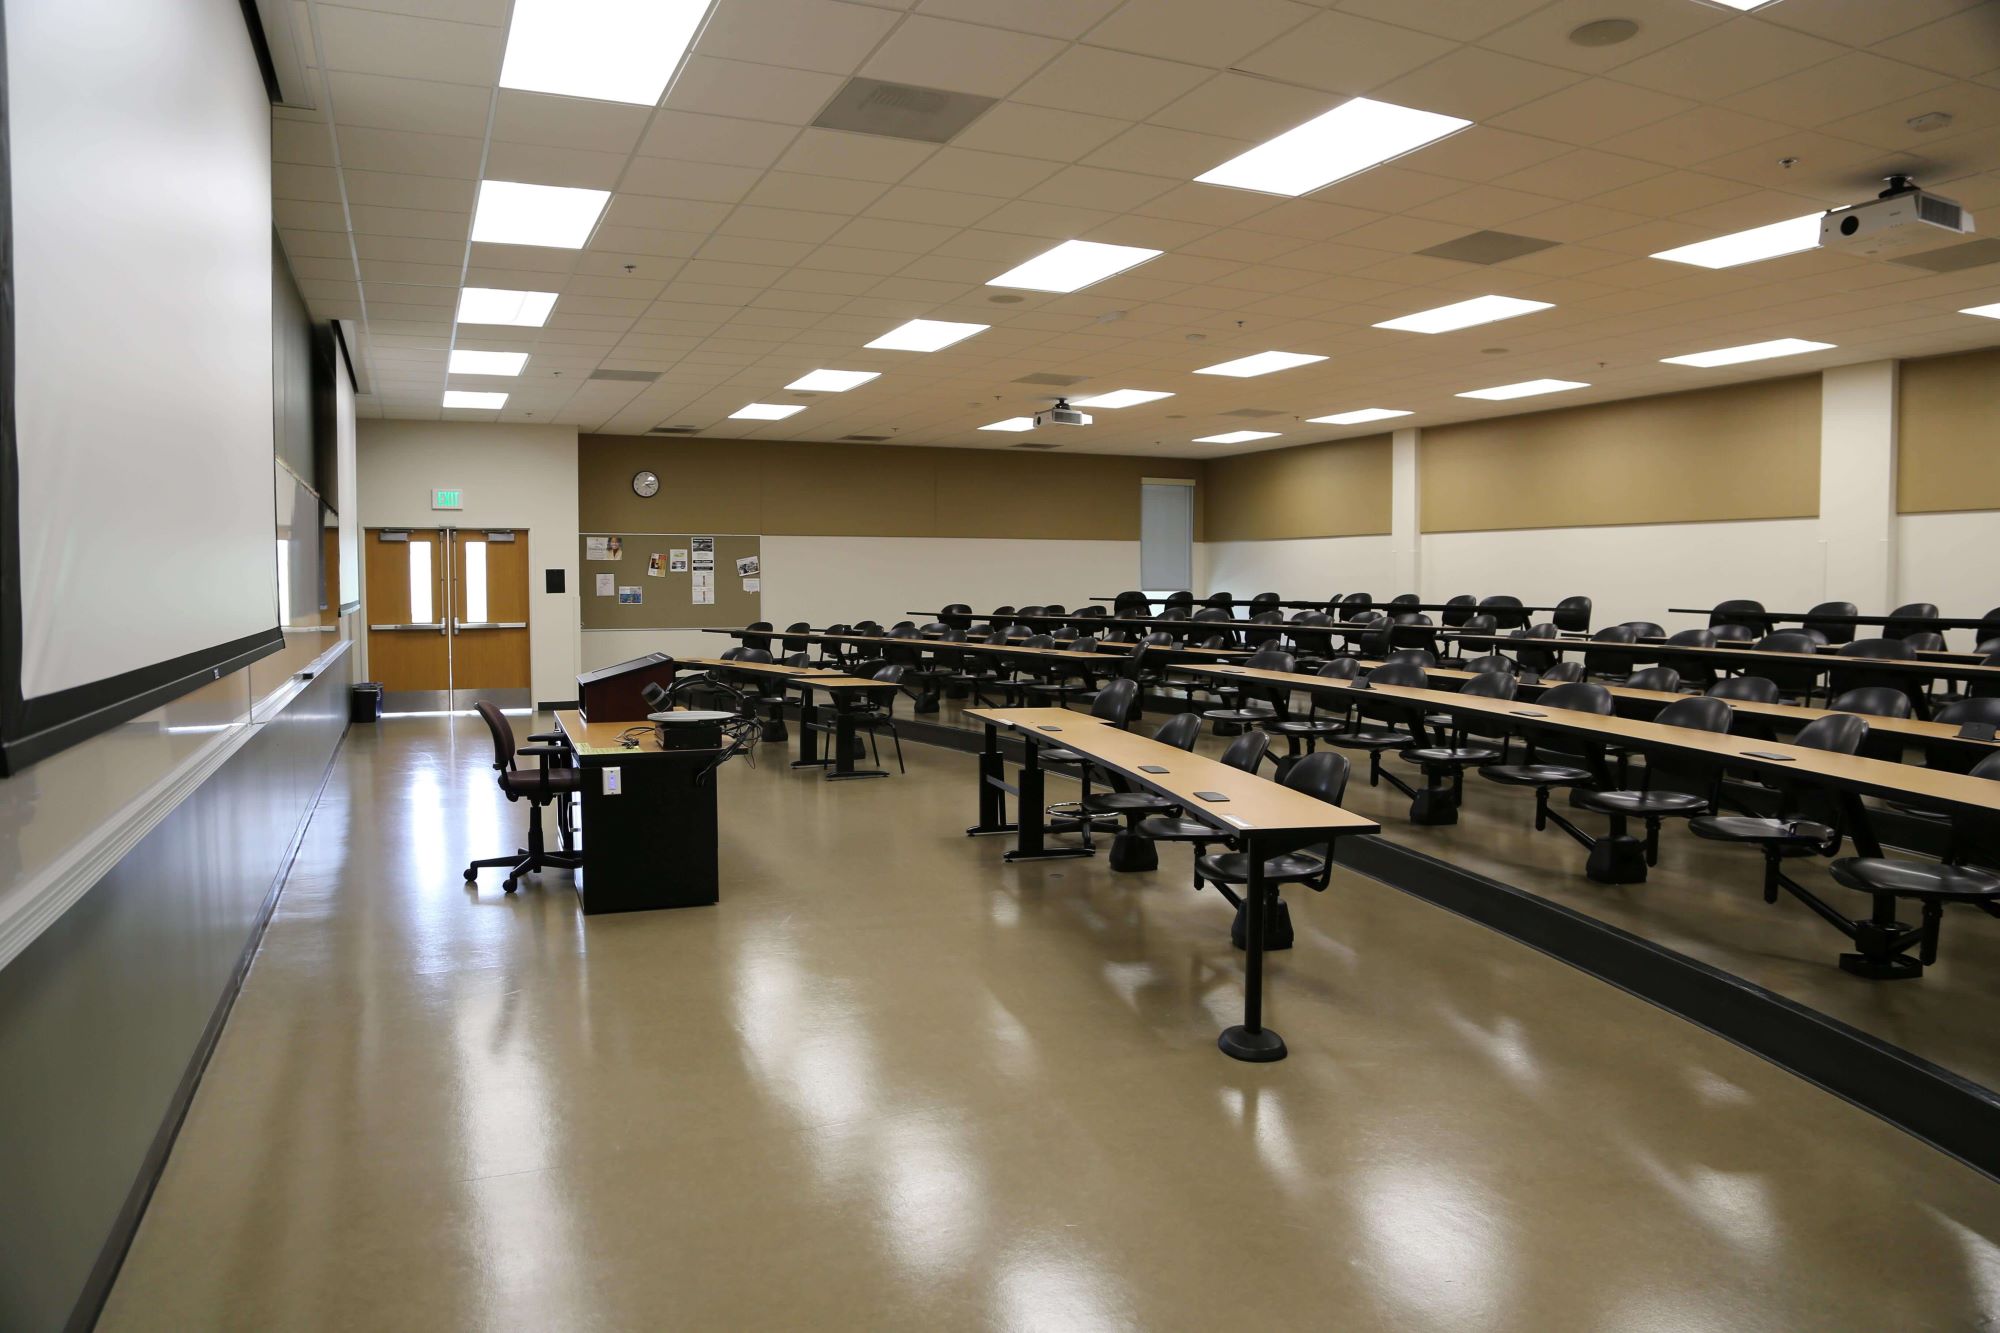 another view of the lecture hall